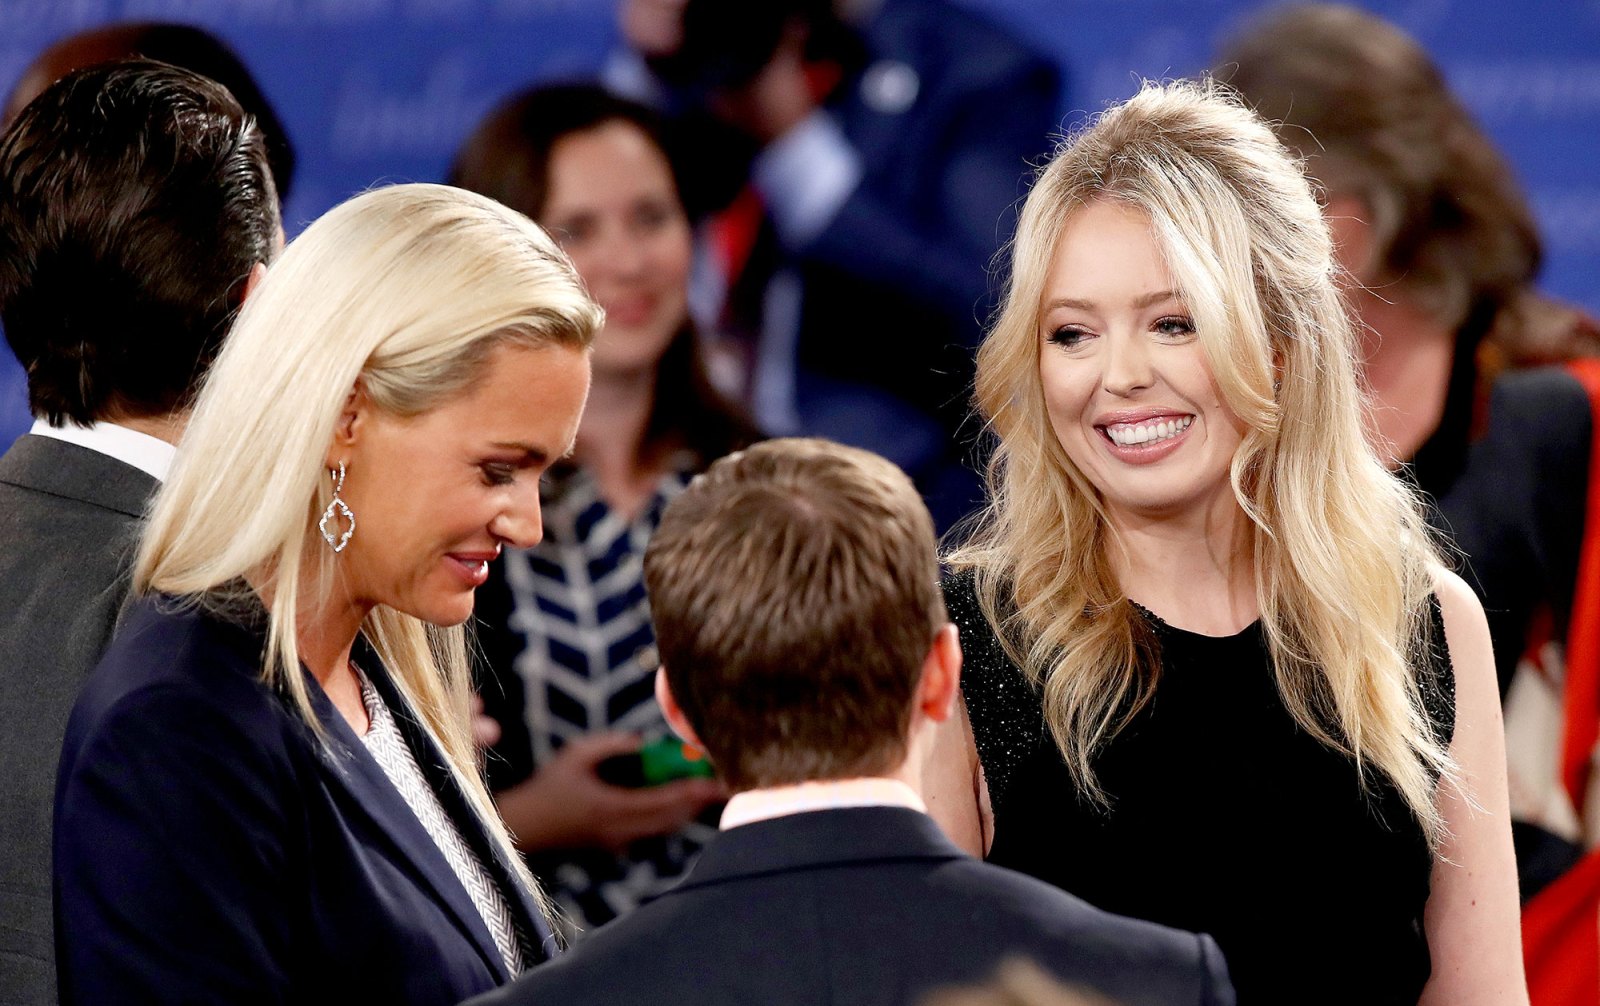 Tiffany Trump Ducked a Kiss From Donald Trump at Second Debate: Watch!